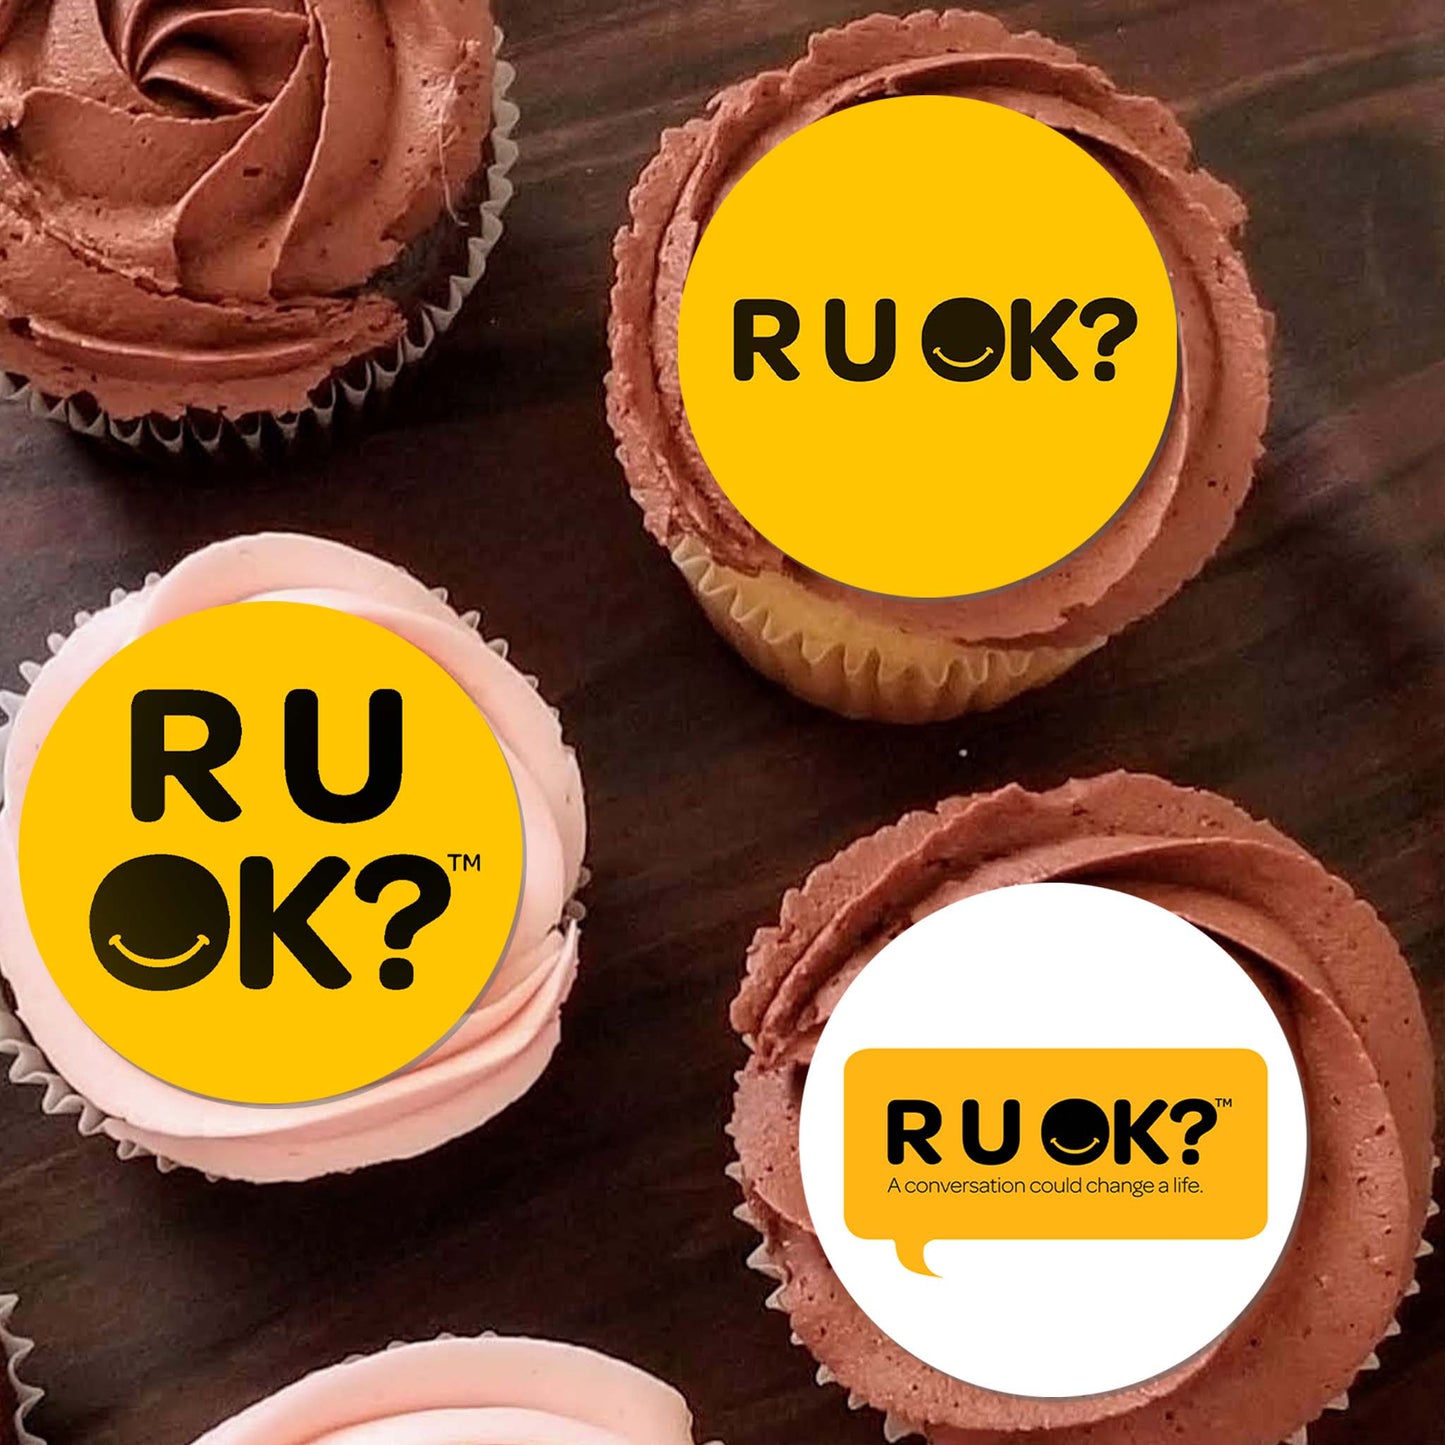 Decorate your cupcakes or cookies for R U Ok? events with these eye-catching edible icing prints.   Perfect for Cupcakes, Cookies, muffins and Biscuits.  Available sizes,  30  x 3.8 cm (1.5') Mini cupcake toppers. 15  x 5 cm (2') cupcake toppers. 12  x 6.3 cm (2.5') cookie toppers.